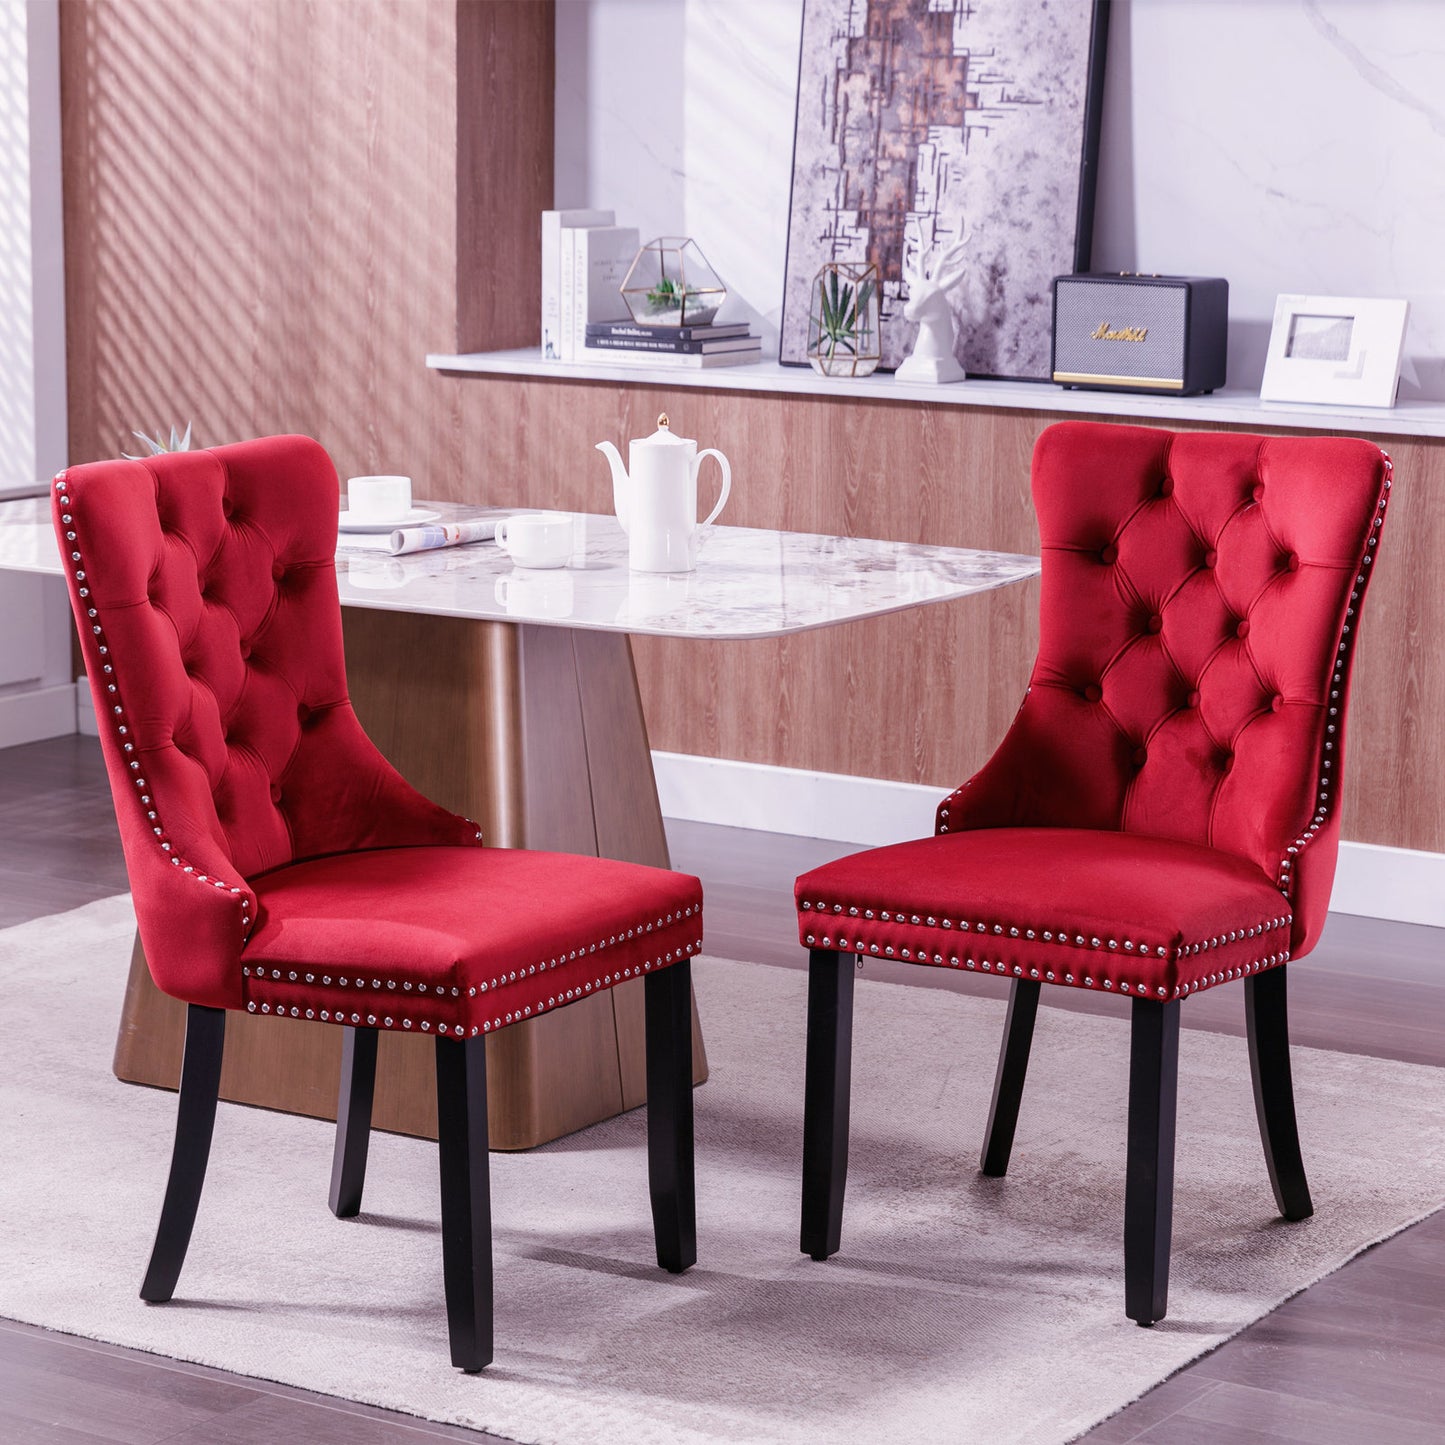 nikki collection modern high-end tufted dining chairs 2-pcs set, wine red